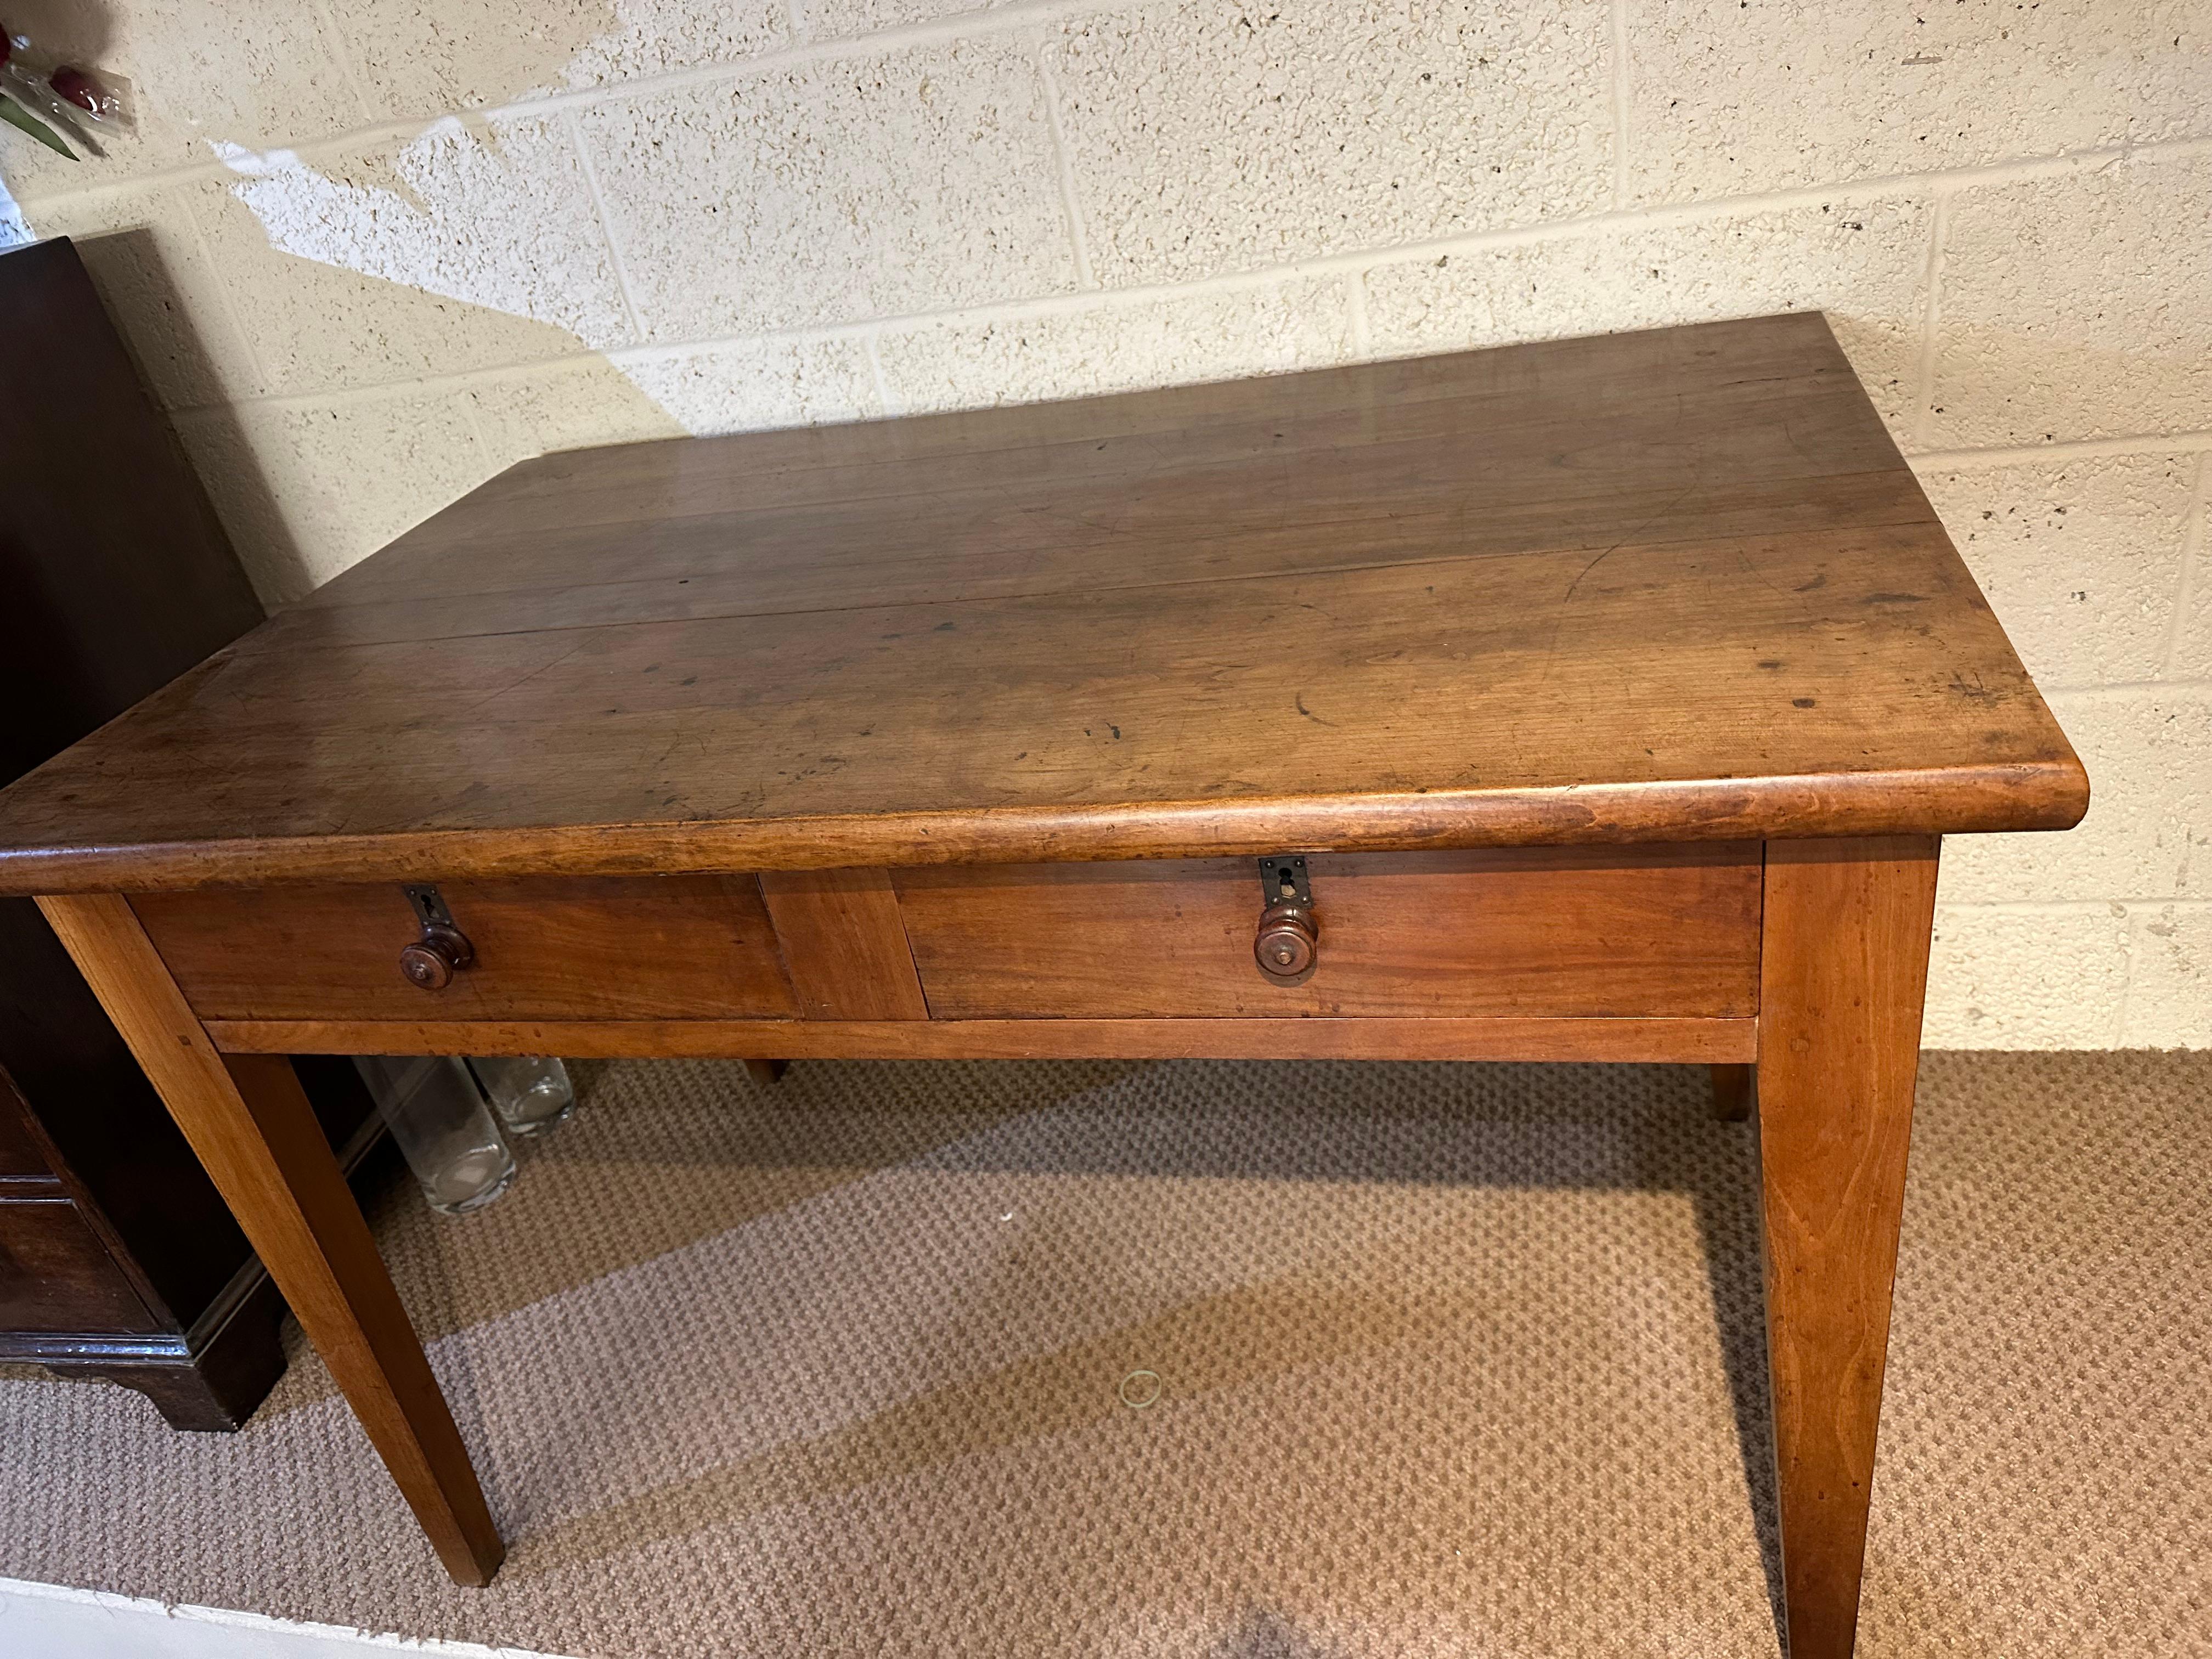 The 19th Century cherry two drawer desk on tapered legs is a remarkable piece of furniture. It features a beautiful patination and colour showcasing the natural aging and wear that adds character and charm to the desk. The desk stands on sturdy